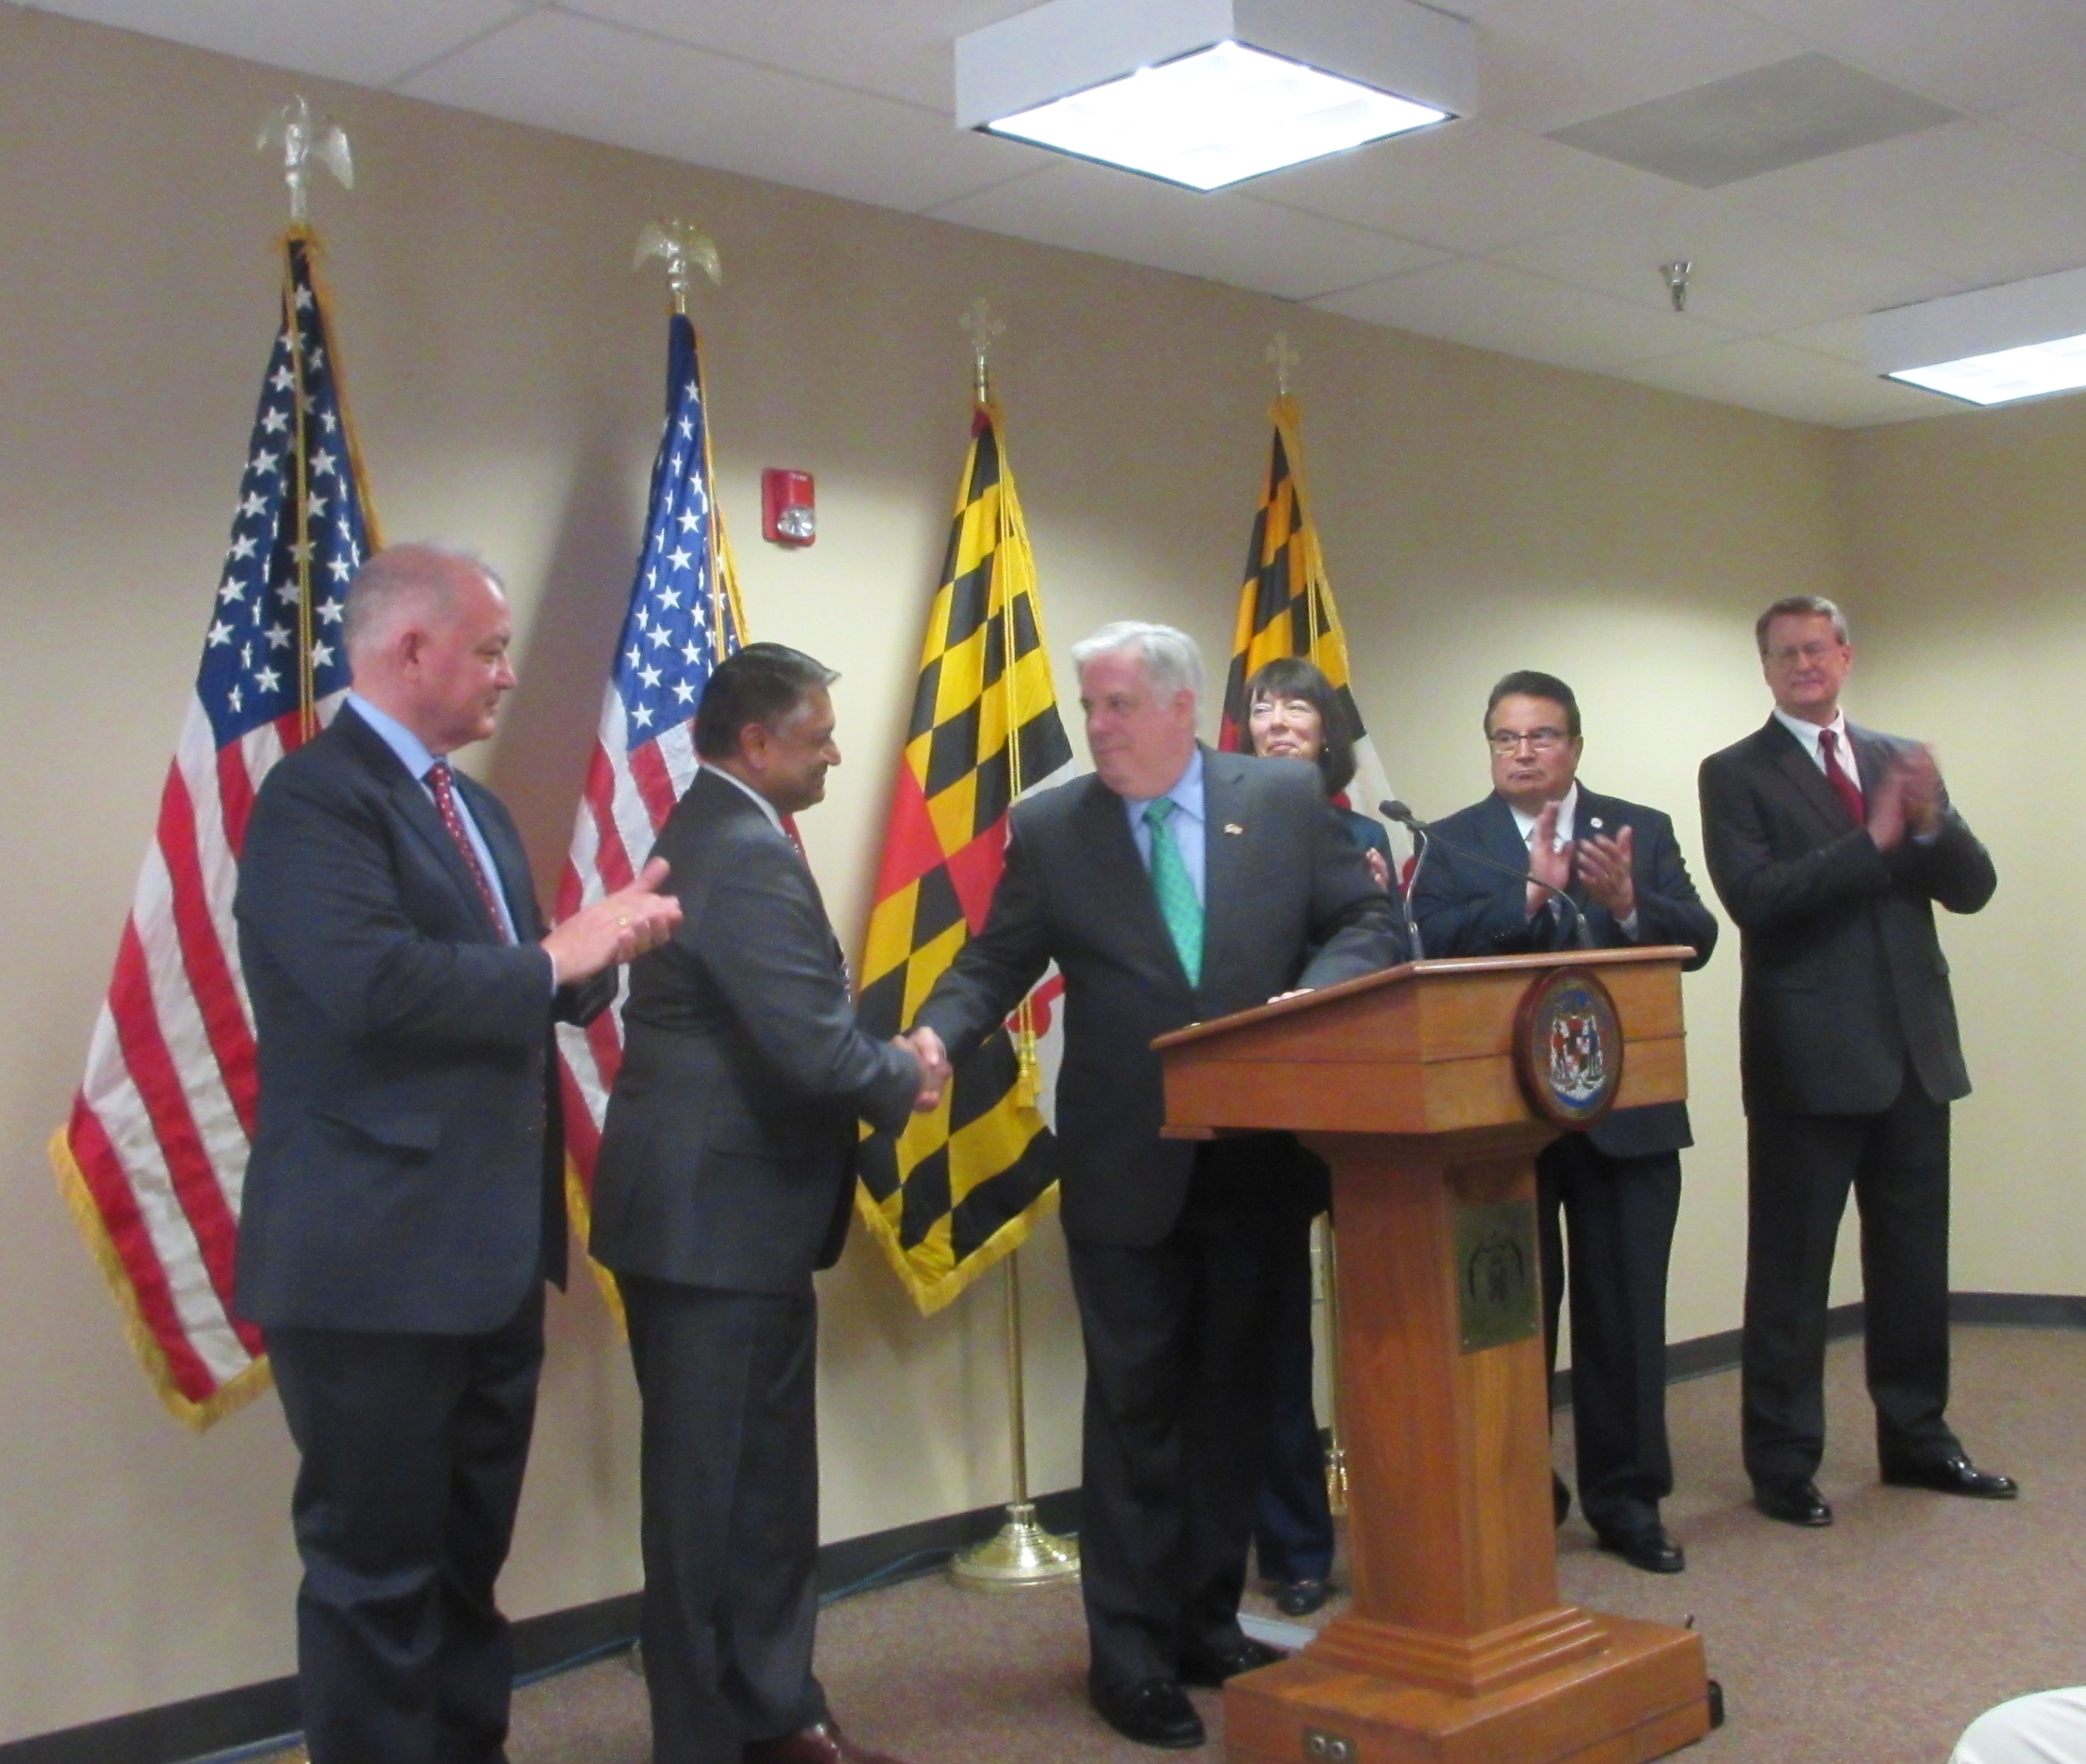 Hogan appoints Brinkley as budget chief; complete list of other appointments